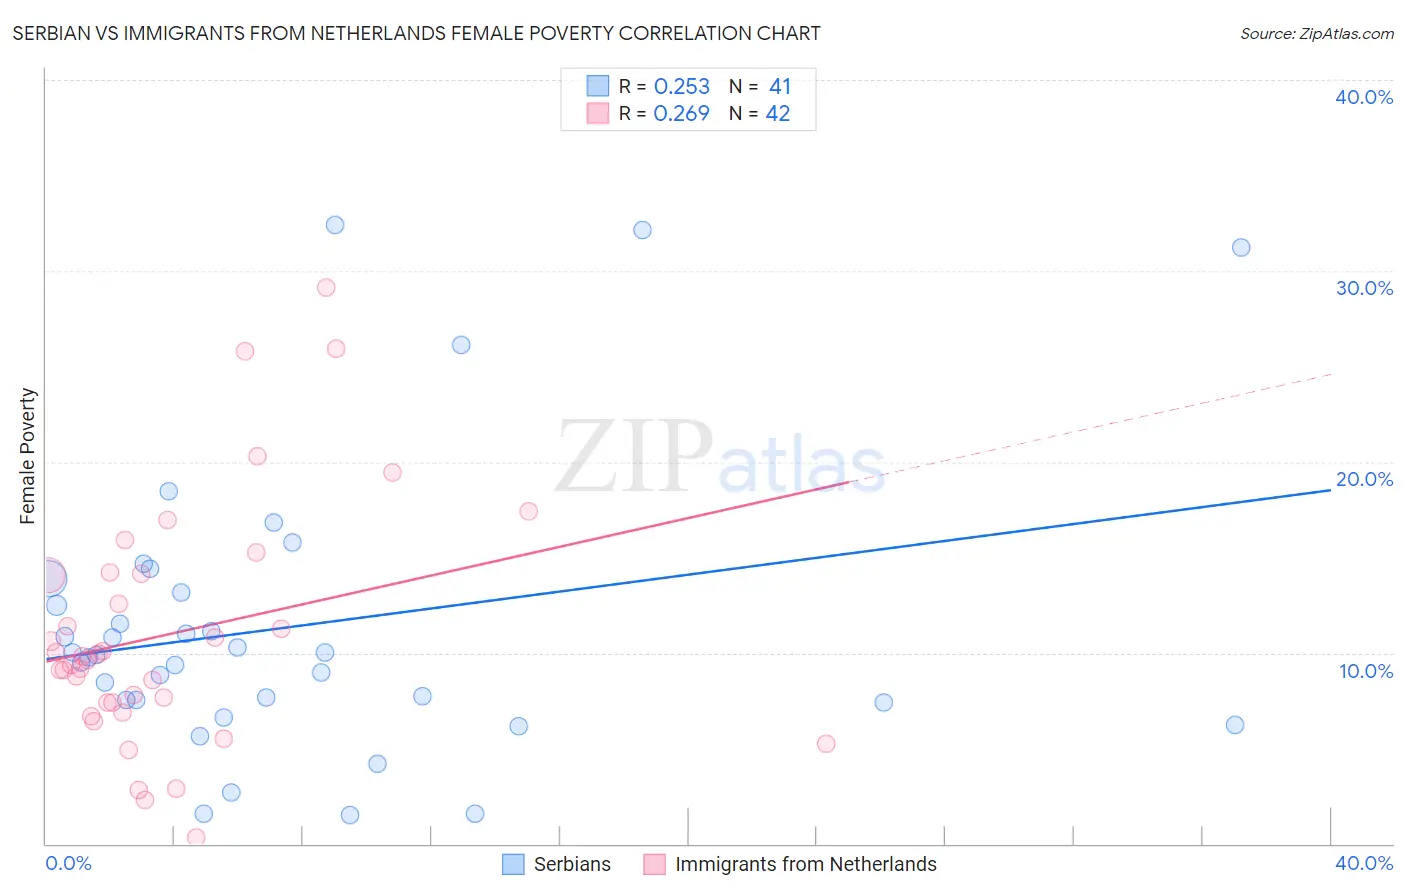 Serbian vs Immigrants from Netherlands Female Poverty